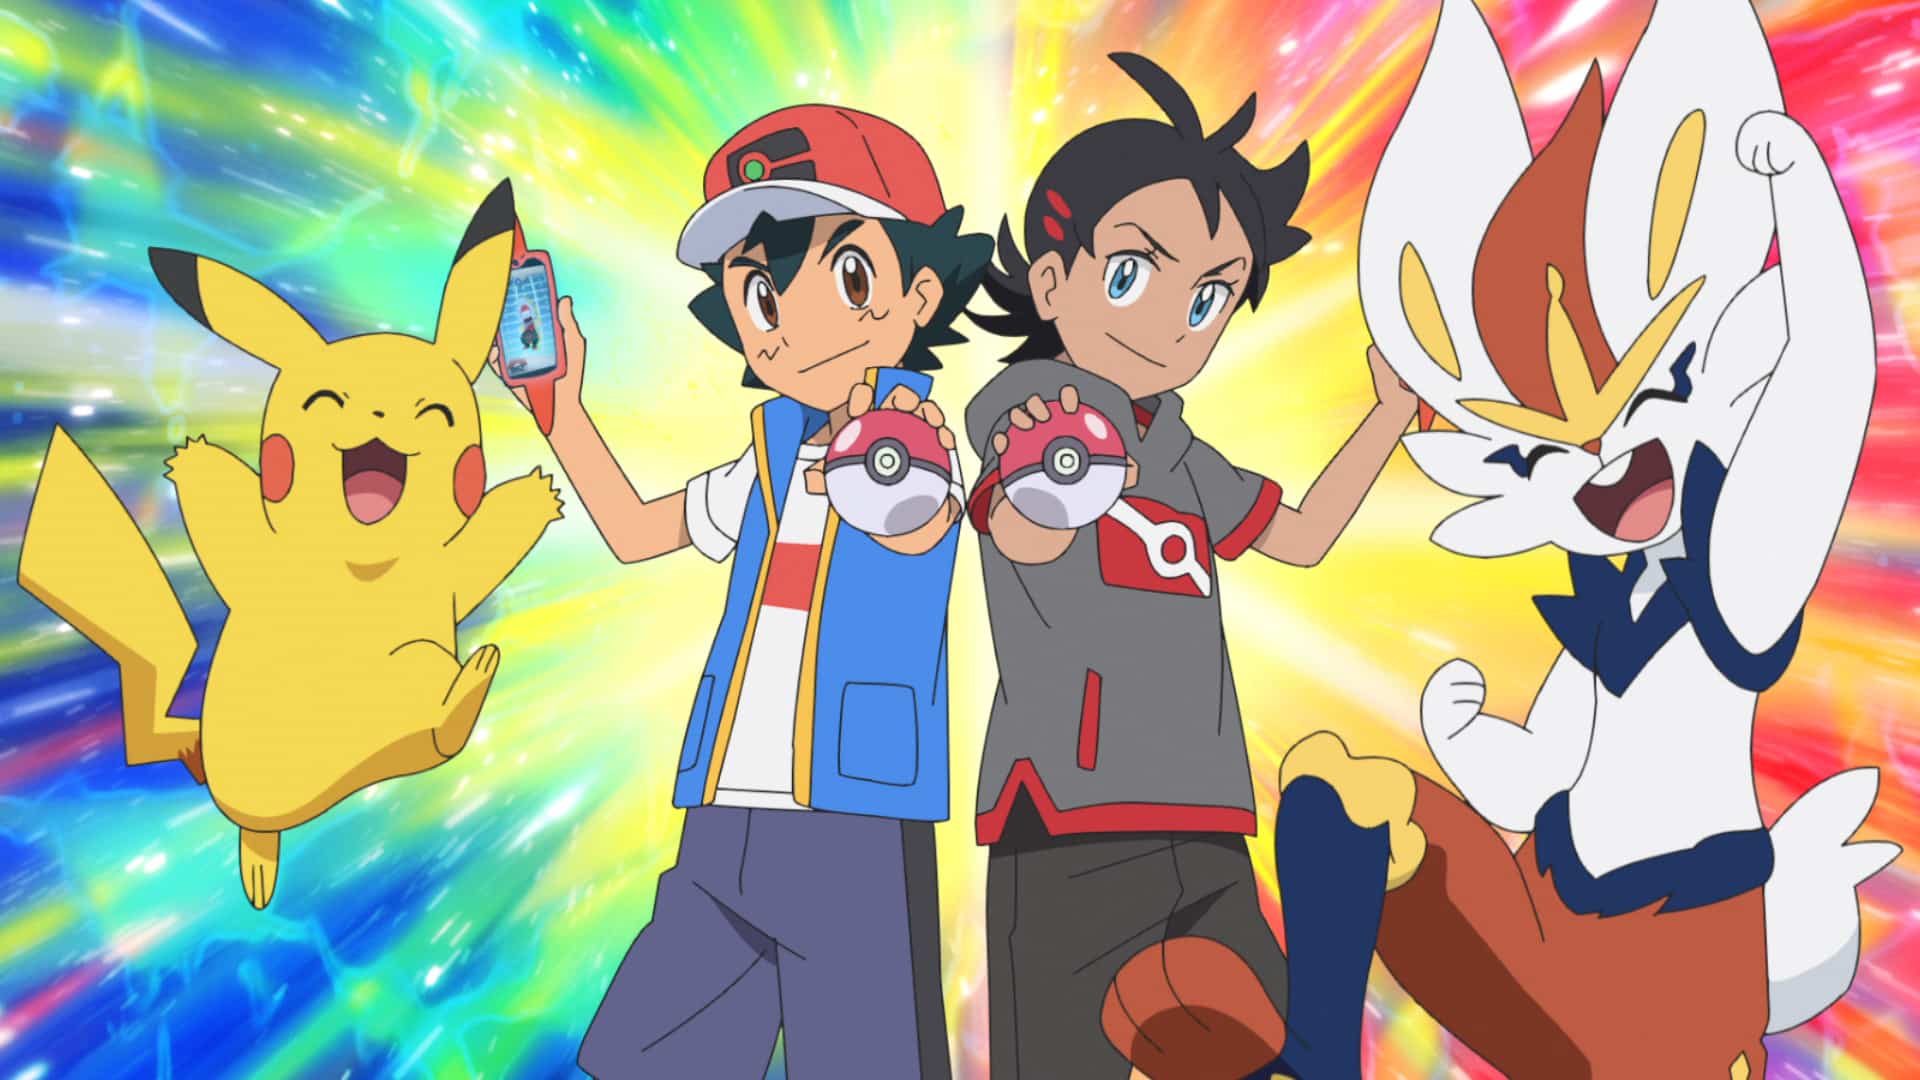 Let’s ‘Goh’ Wild, Pokémon Master Journeys: The Series Now Available for Digital Purchase